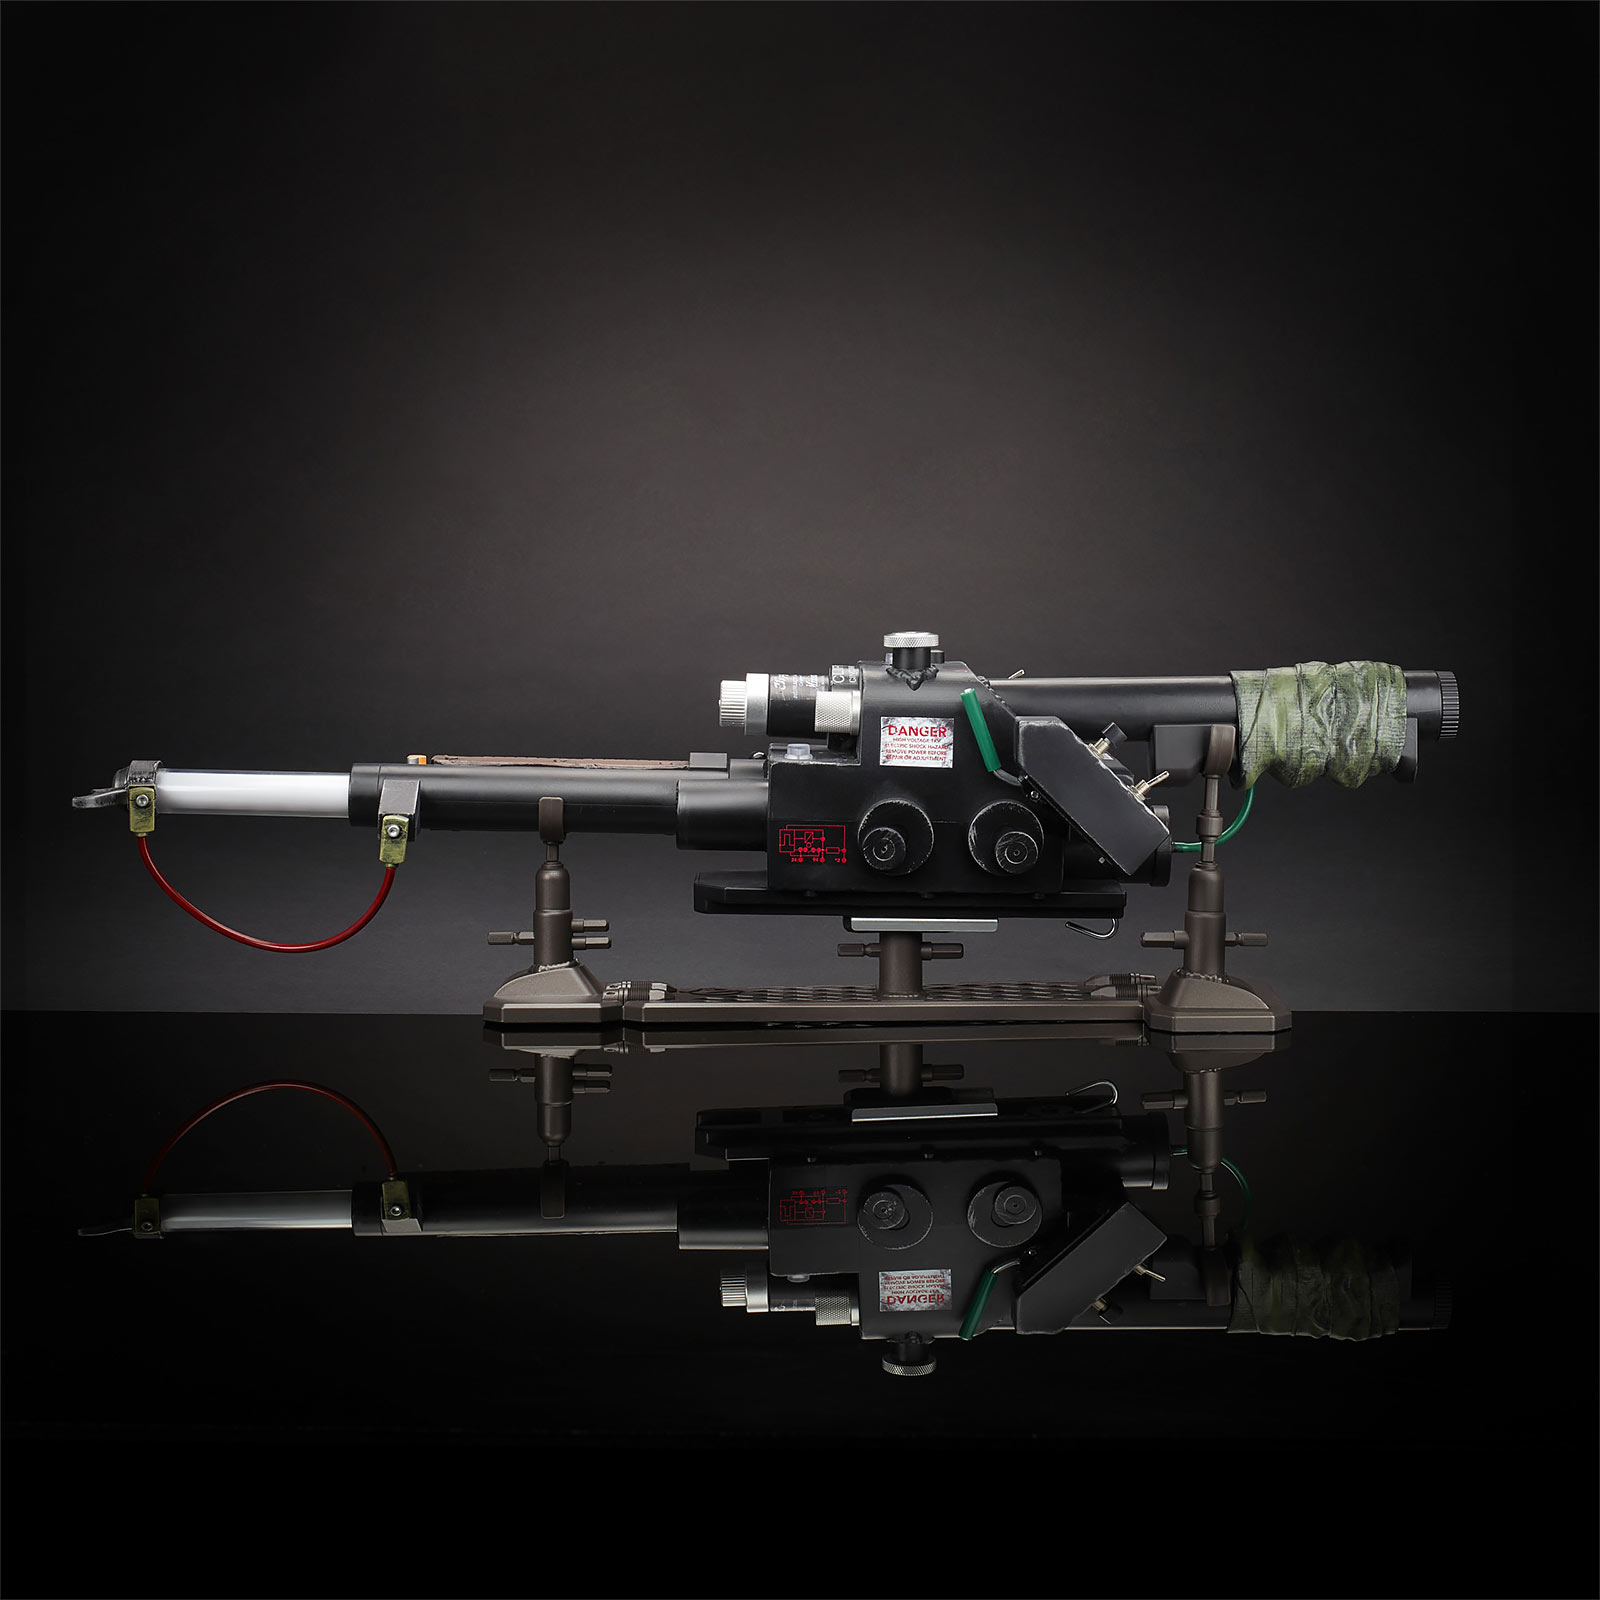 Ghostbusters - Spengler's Proton Beam Premium Replica with Light and Sound